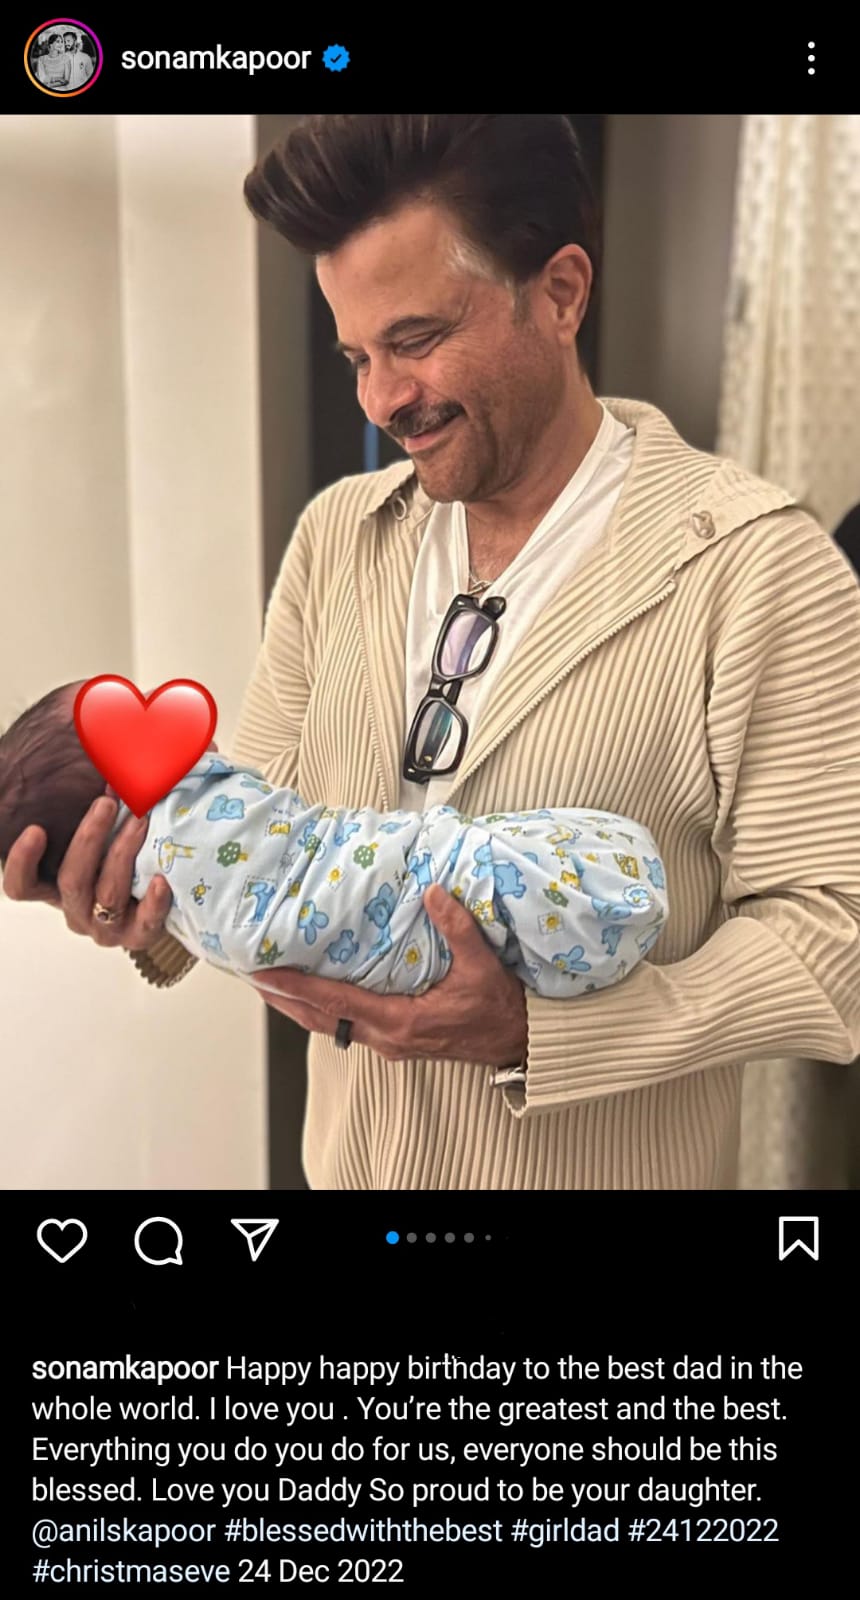 Sonam shared a cute picture of Vayu with Grandpa